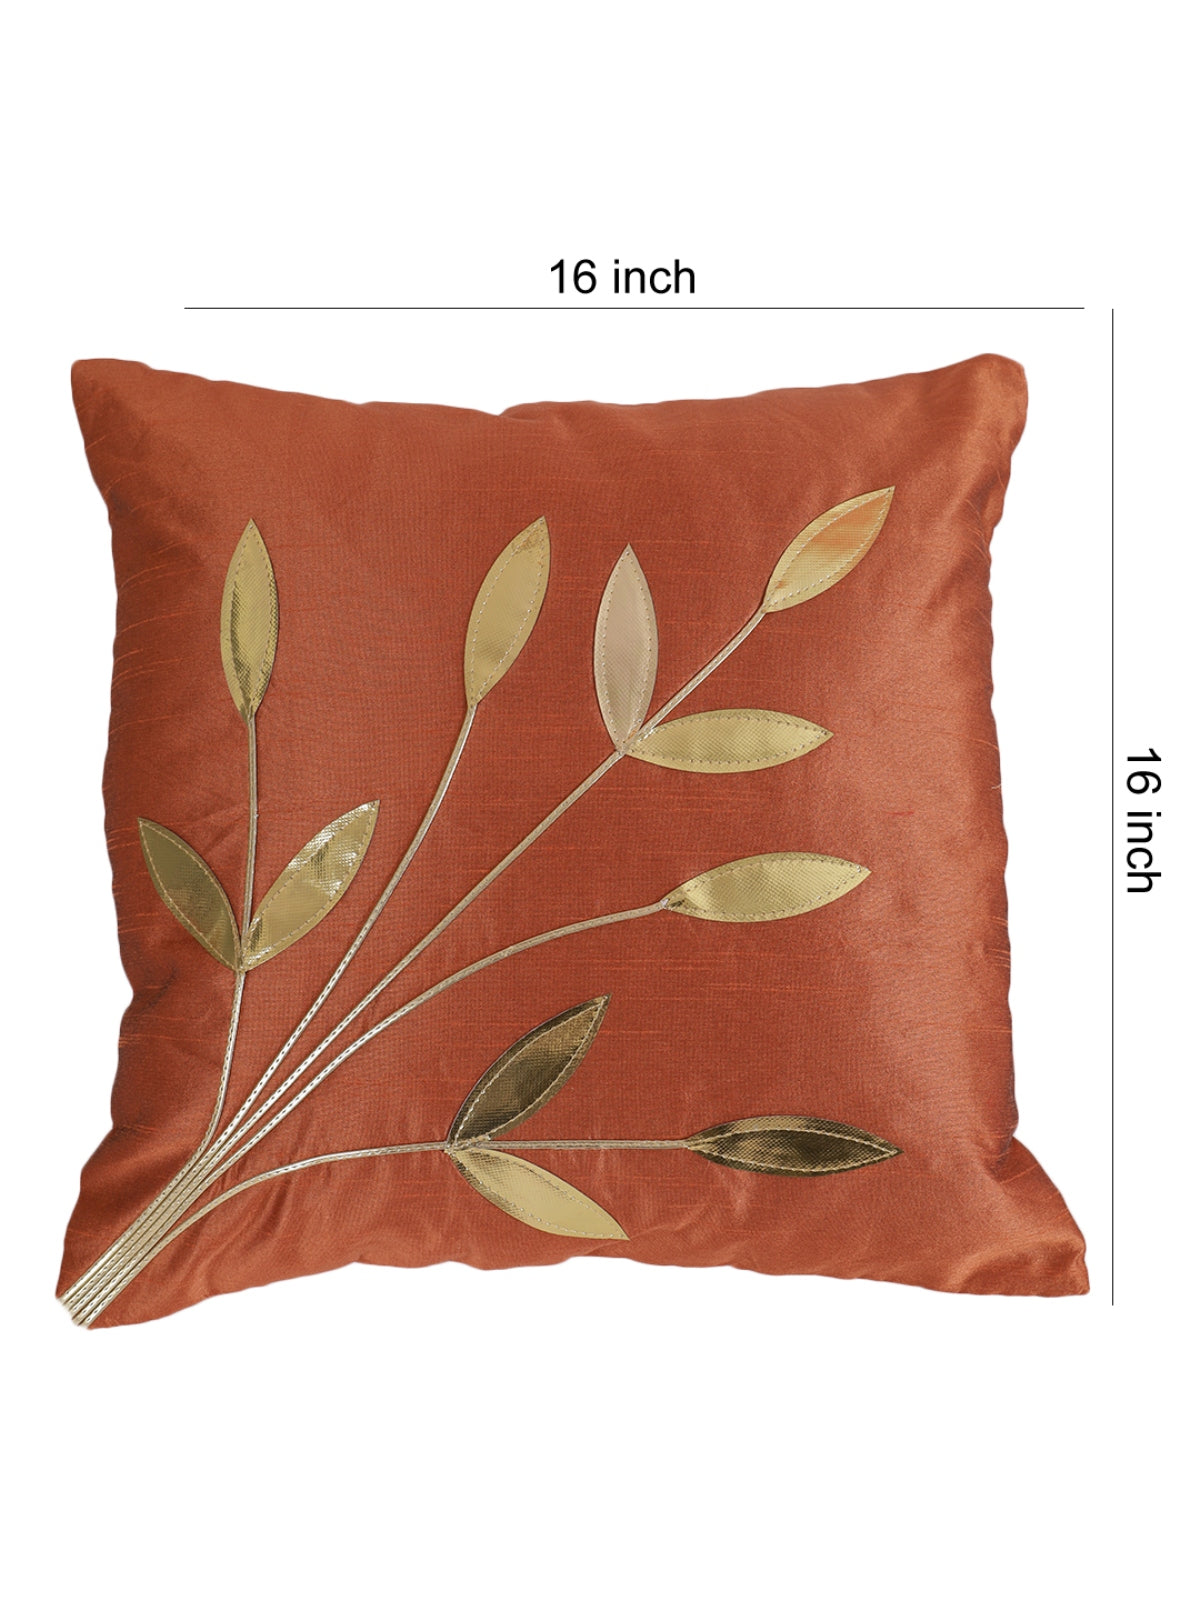 Polyester Leaf Patchwork Designer Cushion Covers 16x16 inches, Set of 5 - Orange